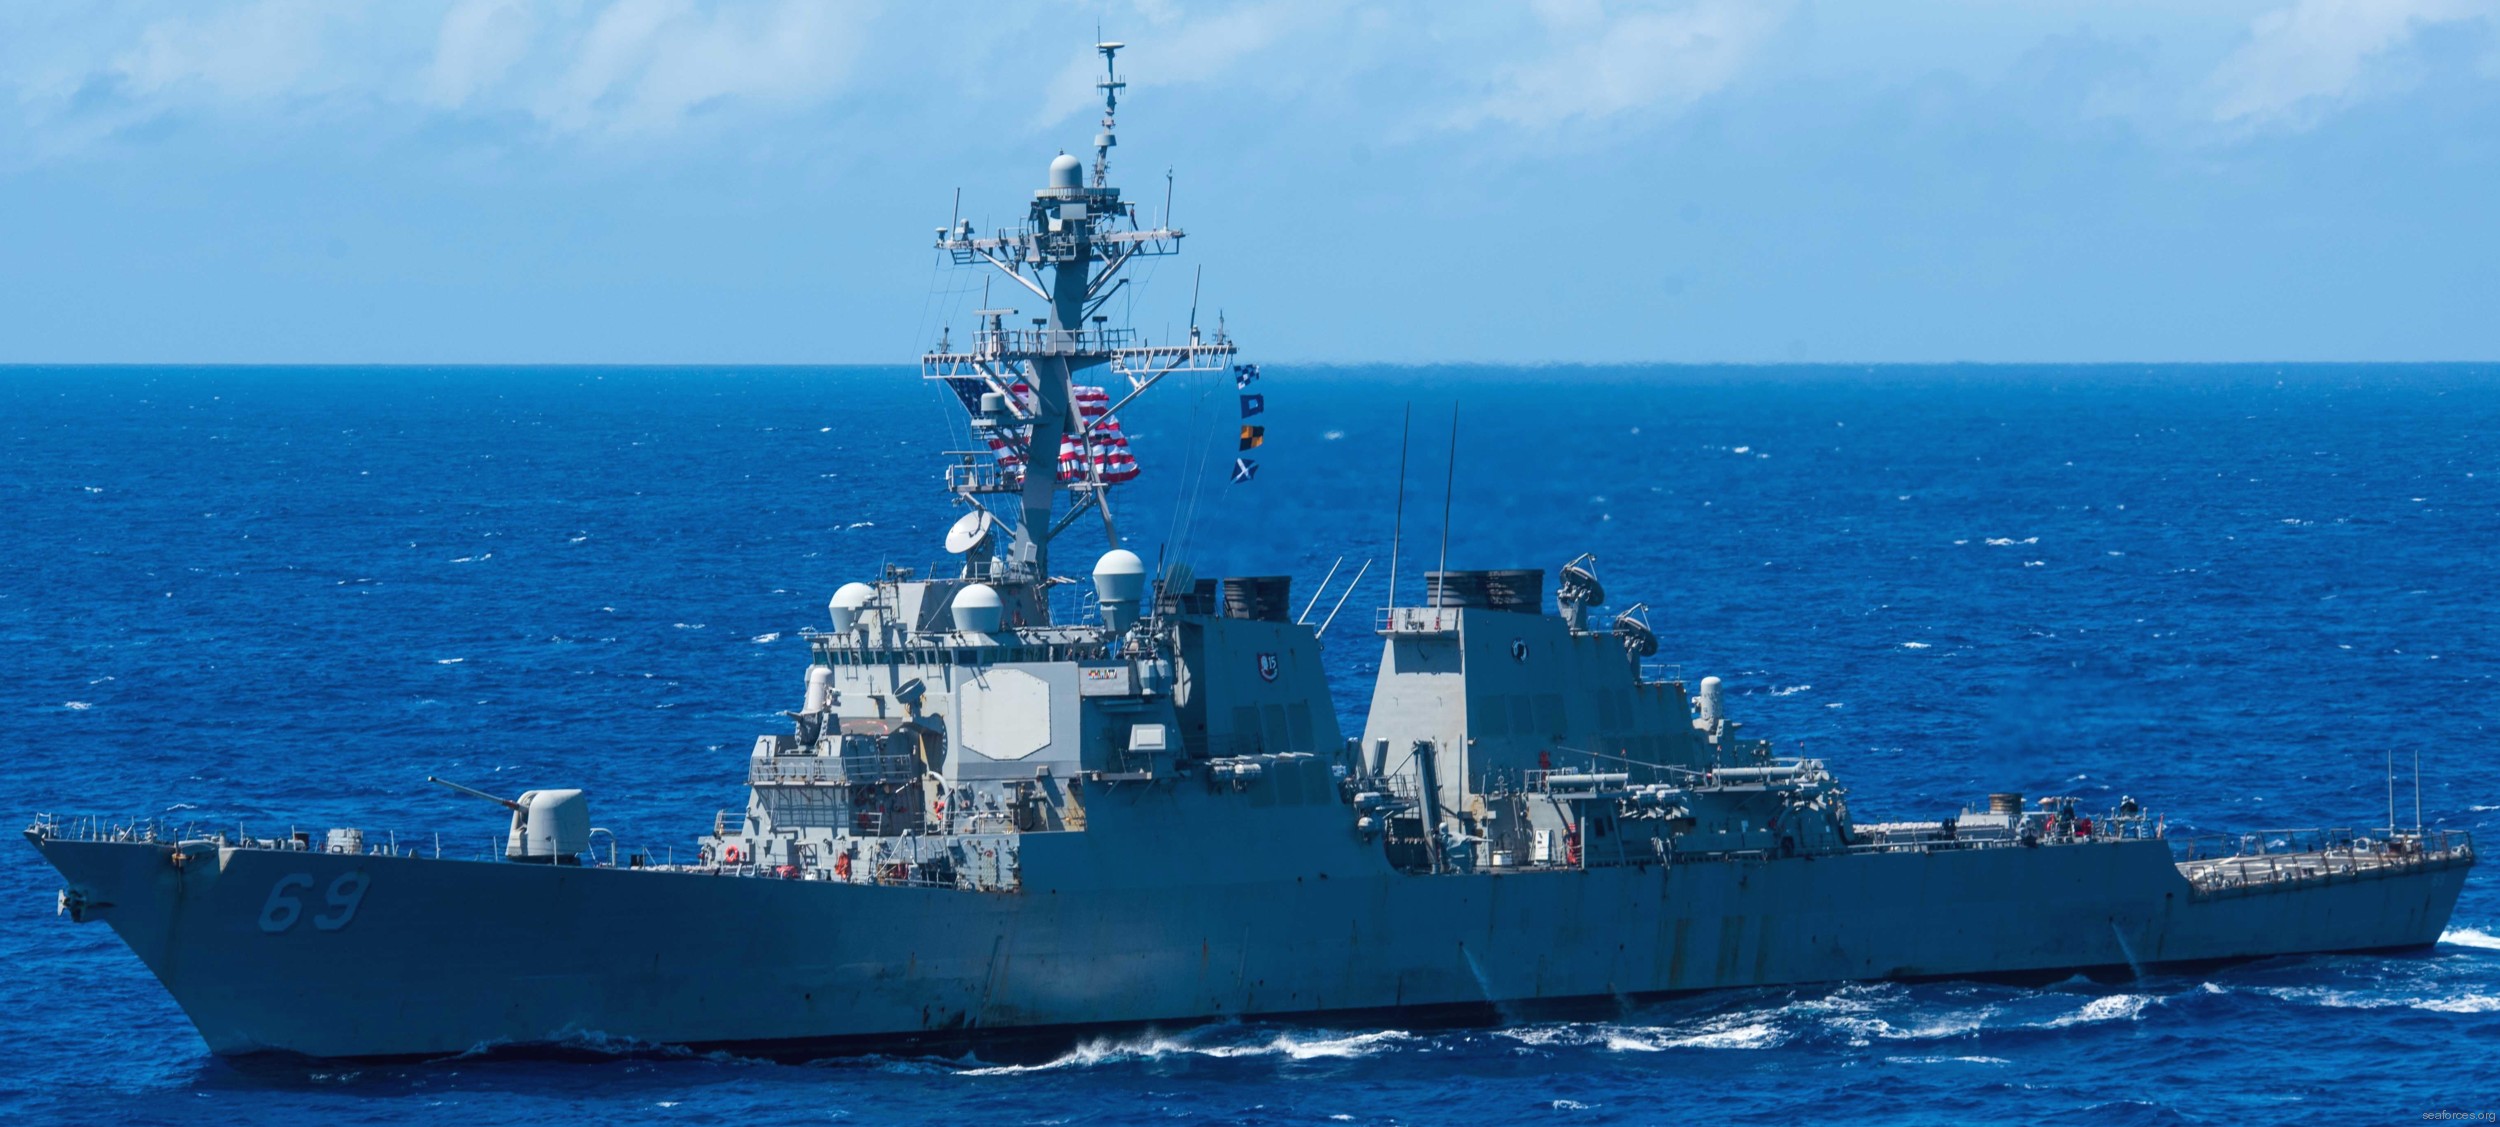 ddg-69 uss milius guided missile destroyer arleigh burke class aegis bmd 09